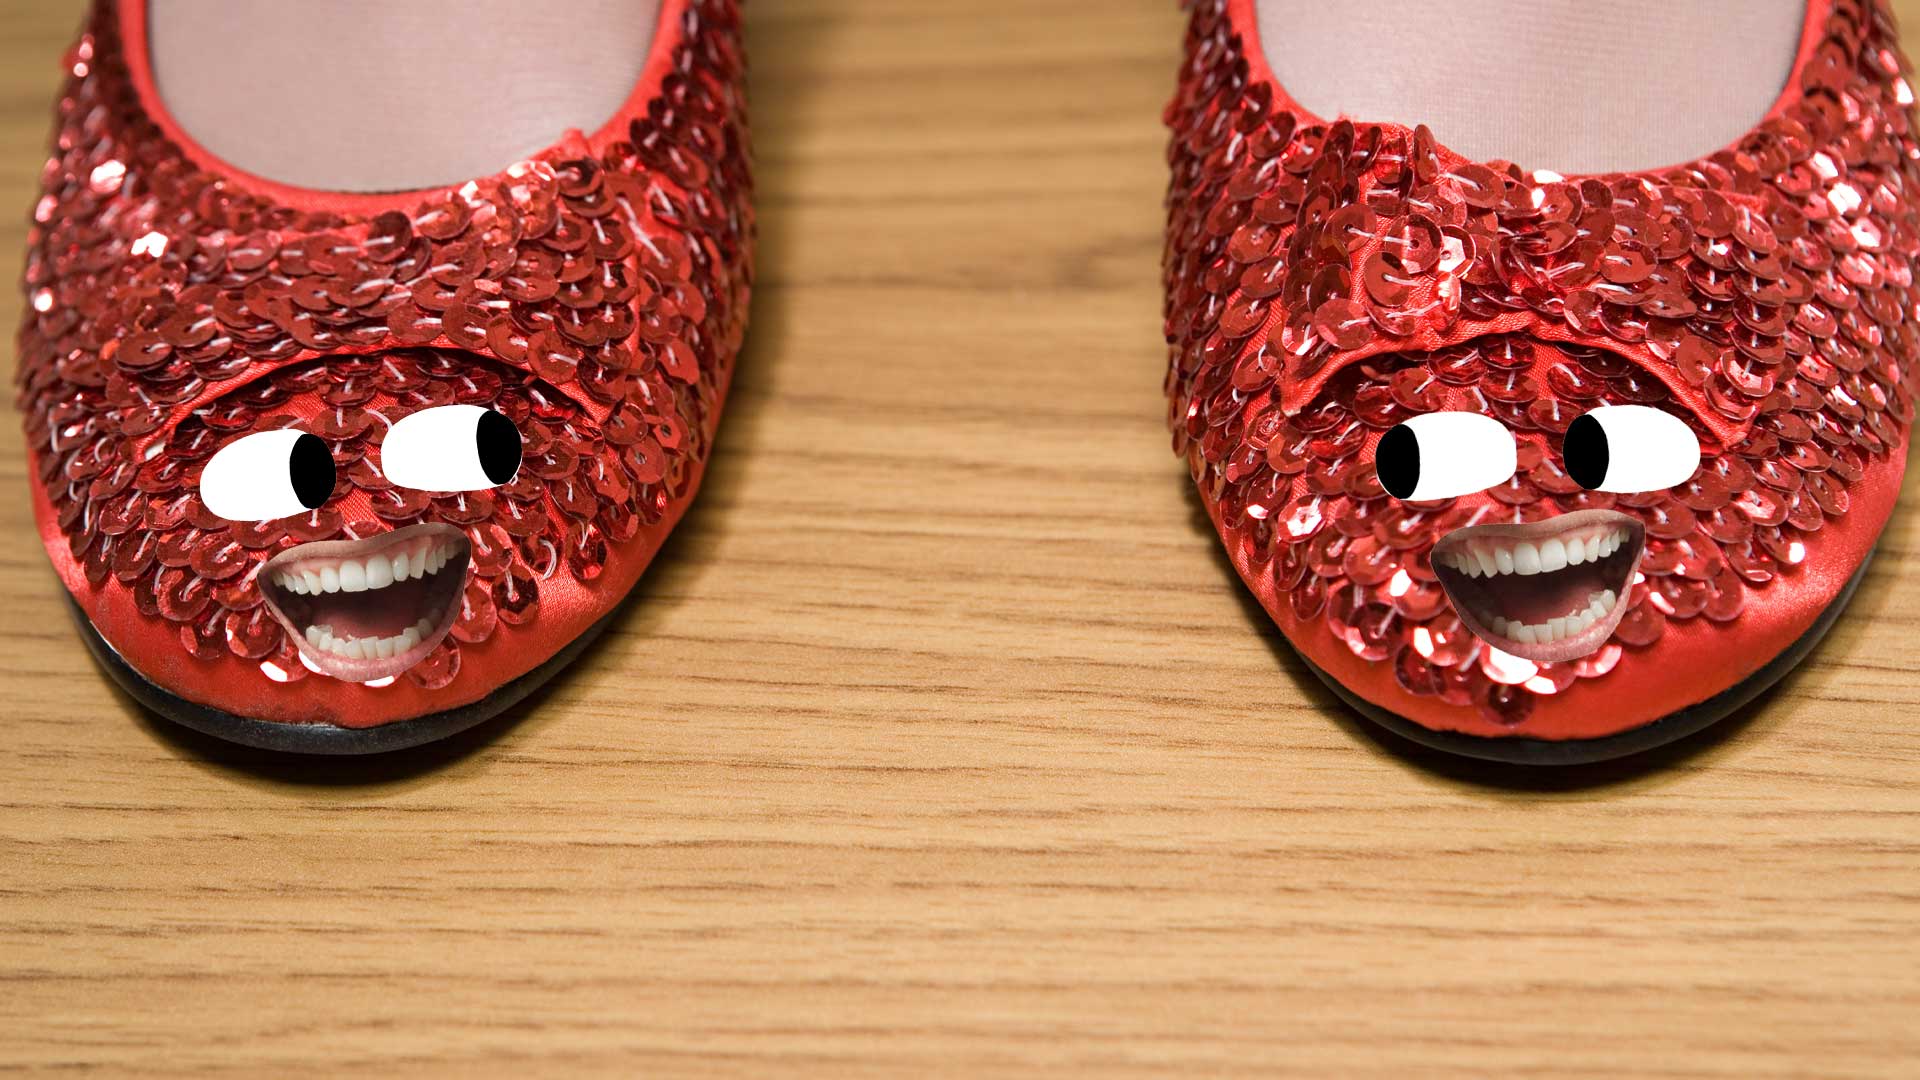 A pair of red glittery shoes